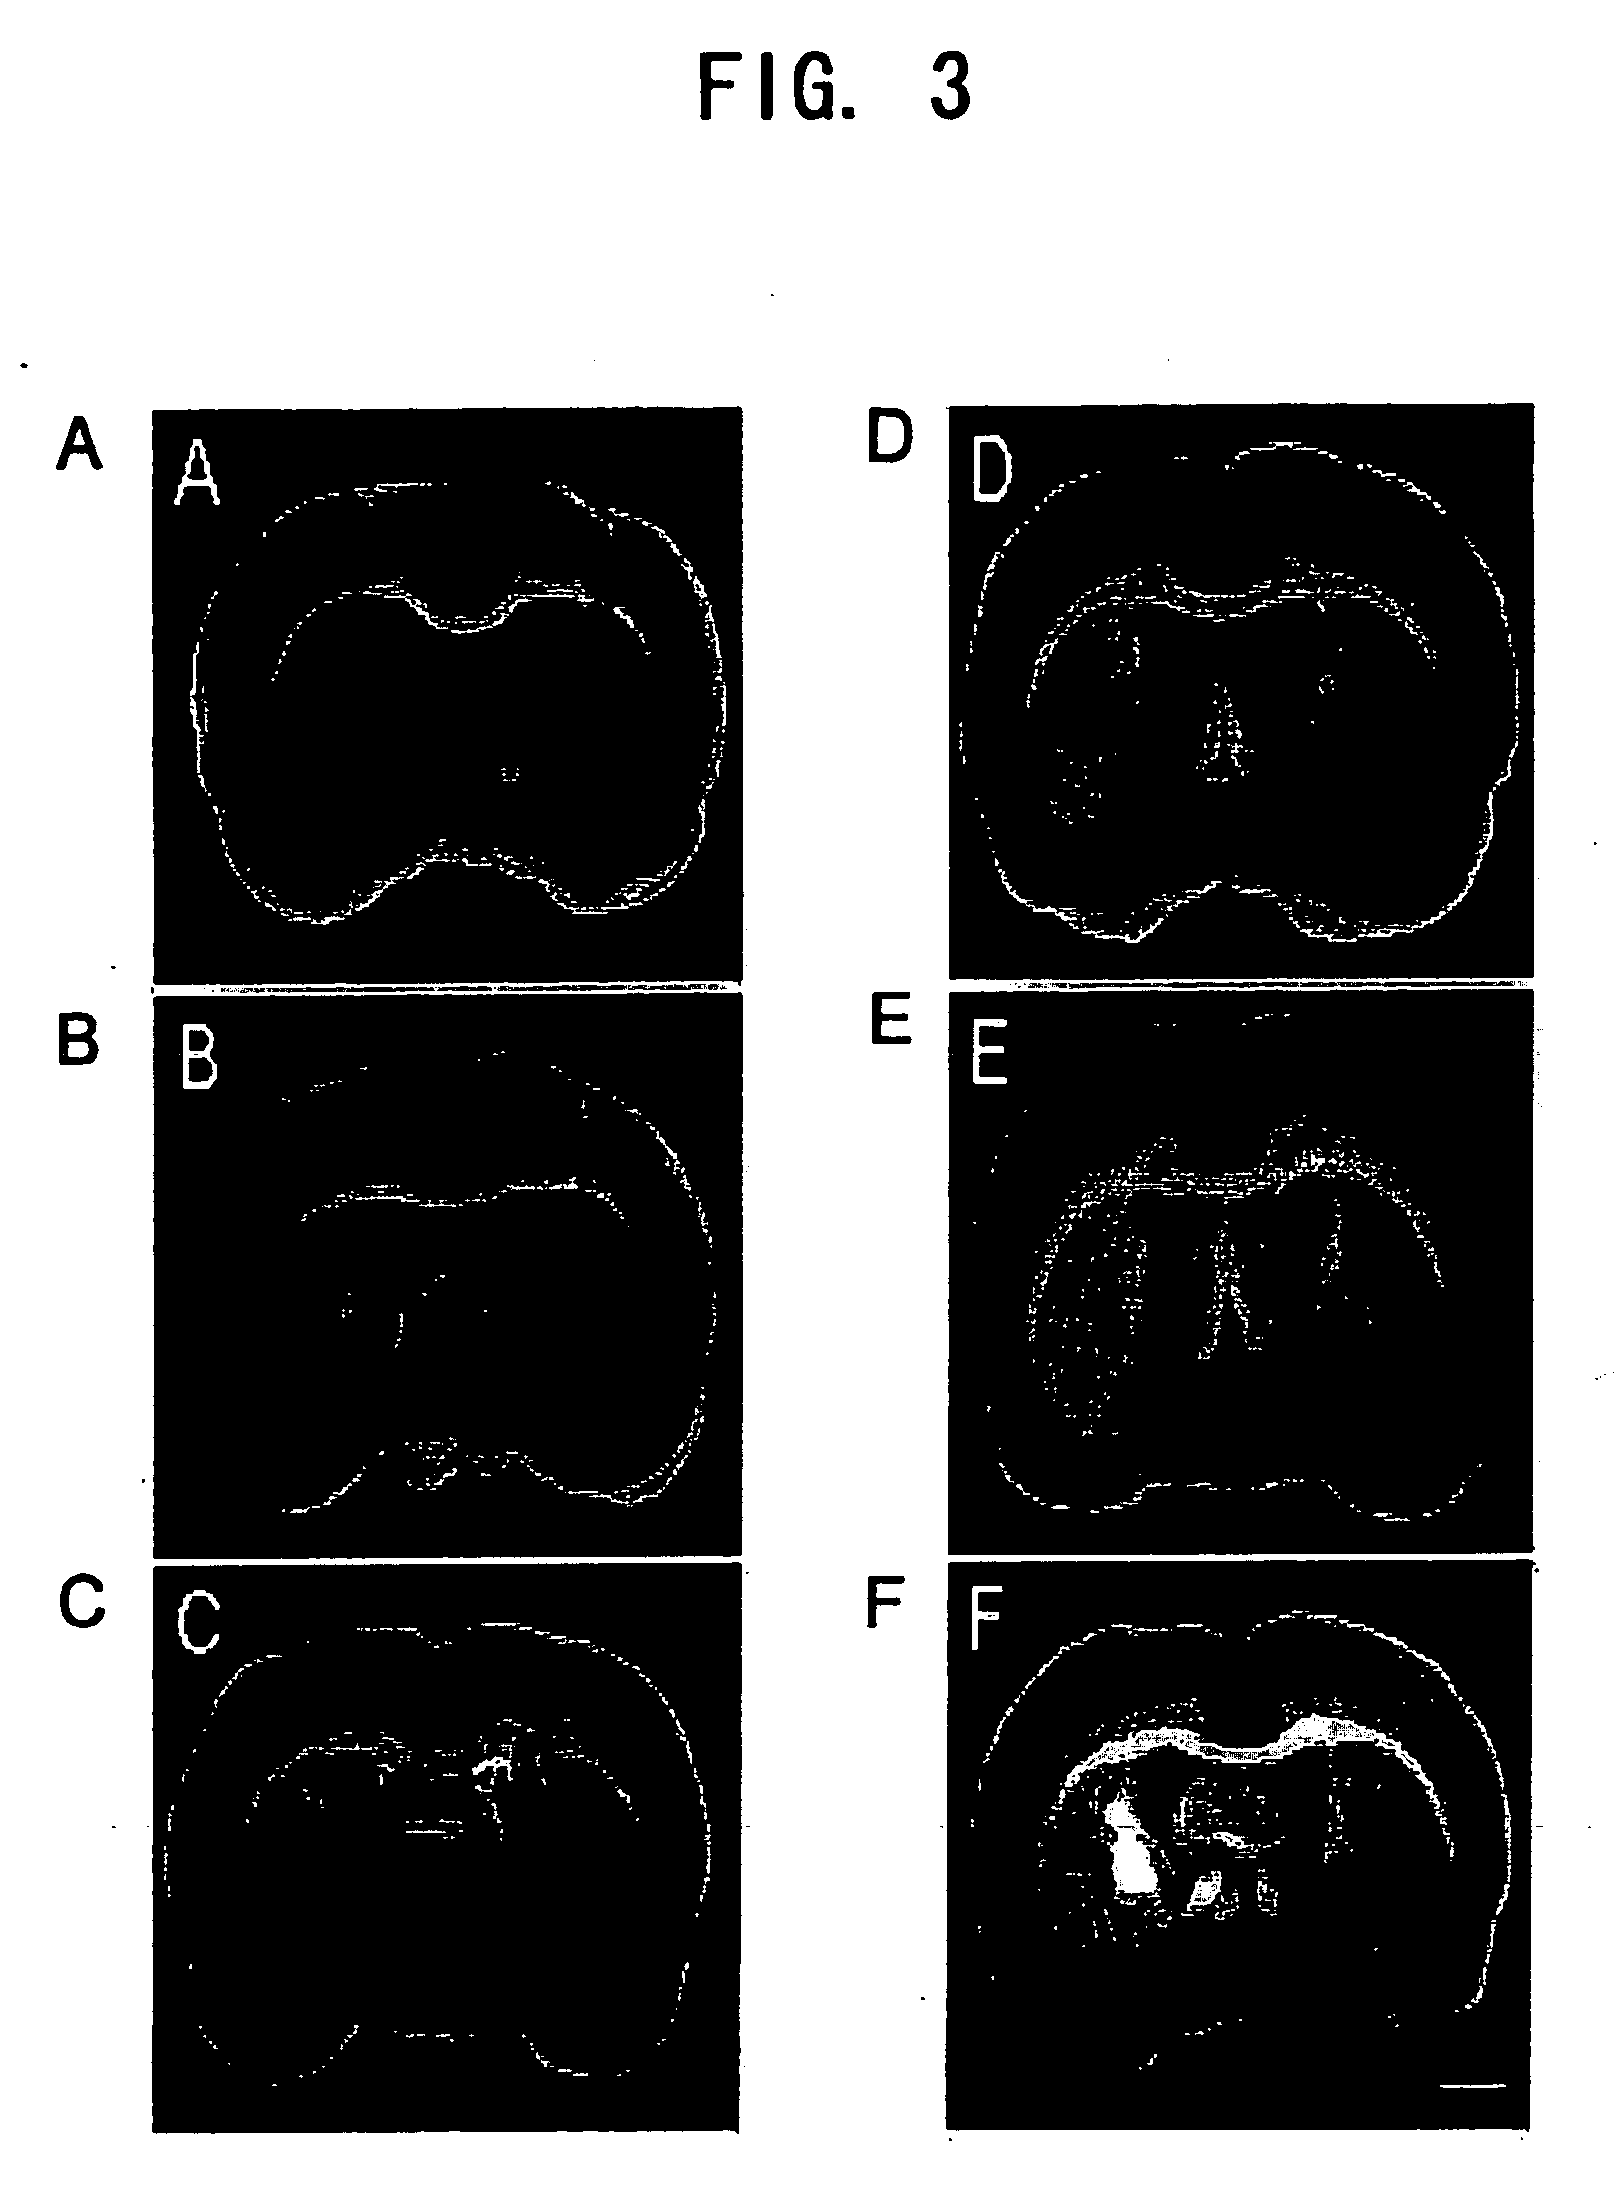 Internally administered therapeutic agents for cranial nerve diseases comprising mesenchymal cells as an active ingredient